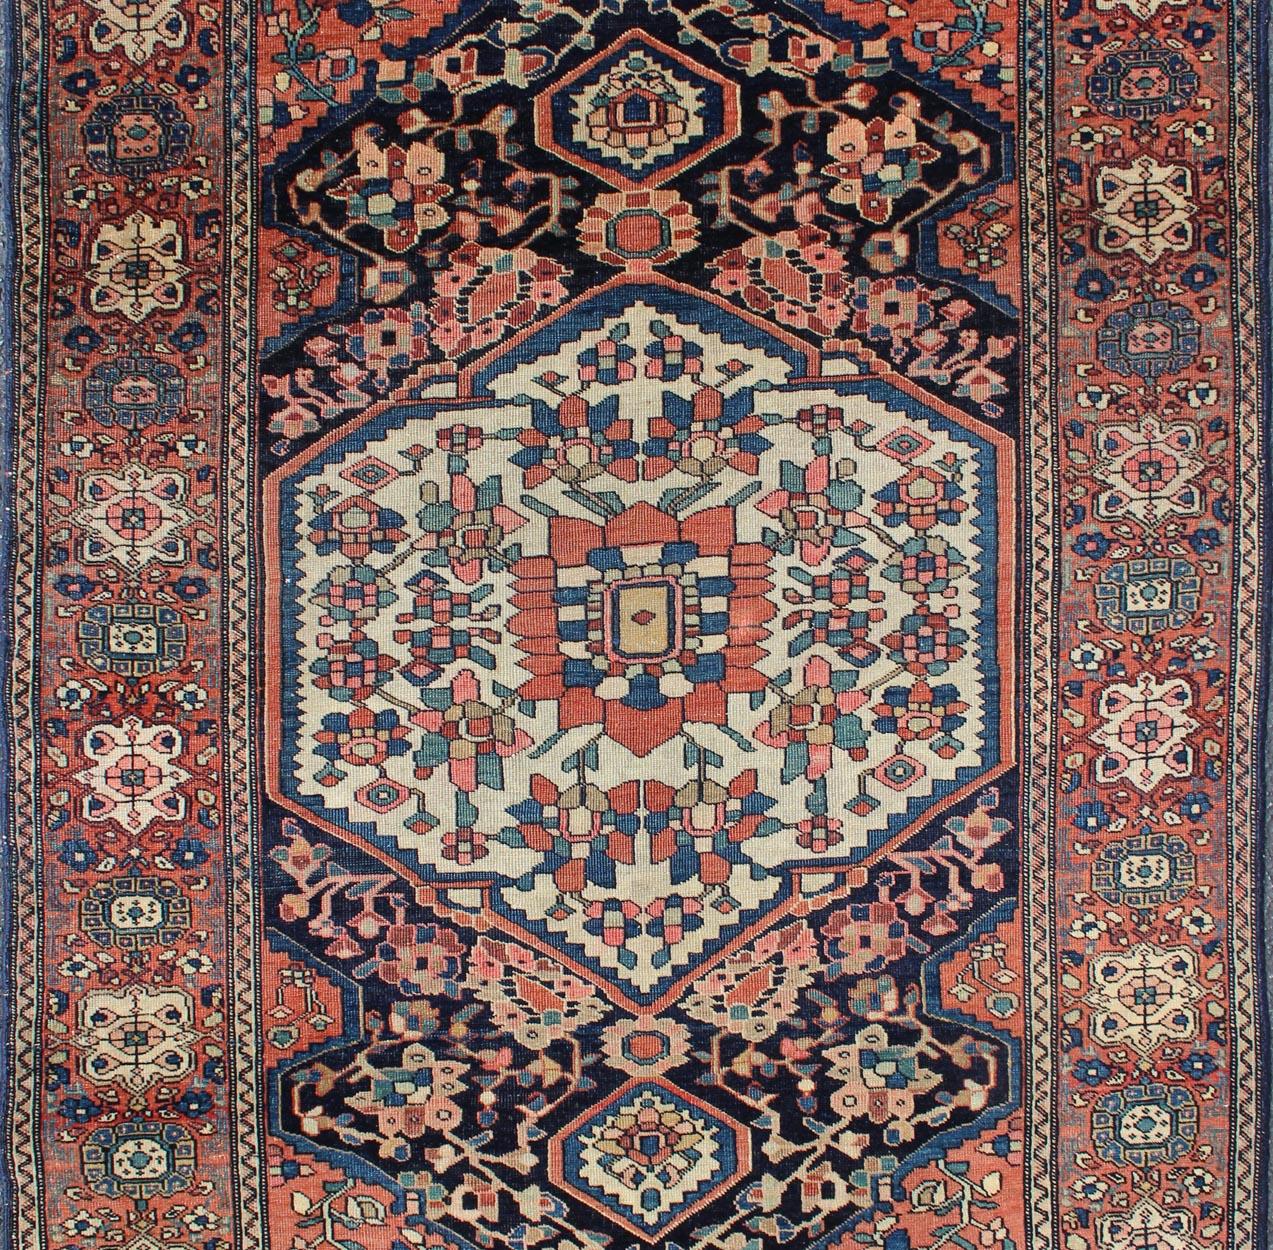 Antique Persian Sarouk Farahan rug with Floral Medallion design, rug 10-81112, country of origin / type: Iran / Sarouk-Ferahan, circa 1890

This fine Ferahan-Sarouk carpet form the late 19th century boasts an impressive multi-layered central